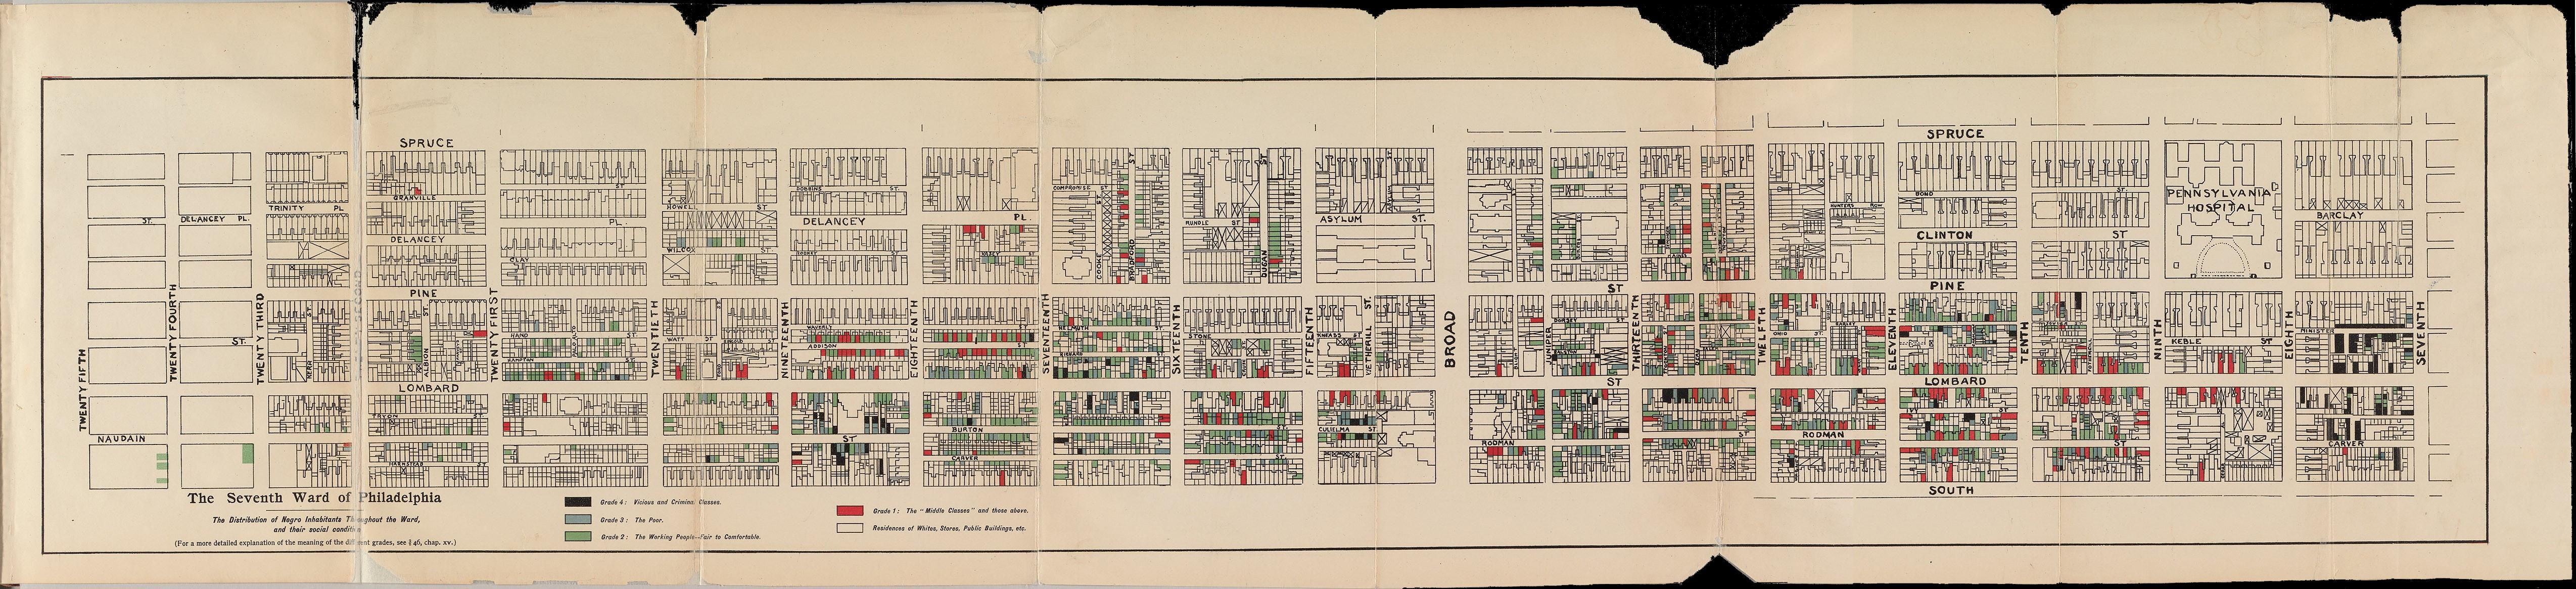 A map of the seventh ward of Philadelphia. The map is about four times as wide as it is long, and its yellowed paper is worn, creased, and torn at the edges. Subdivided by street names, the Black population in this region is categorized by a color which corresponds to social condition. Red, green, blue, and black rectangles are drawn within building outlines that run along the streets of the ward. Red describes the middle and upper classes, green represents the “fair to comfortable” working class, blue describes the “poor” lower class, black represents the “vicious and criminal classes,” and the remaining white spaces, which occupy much of the map, indicate white residences, stories, public buildings, “etc..”